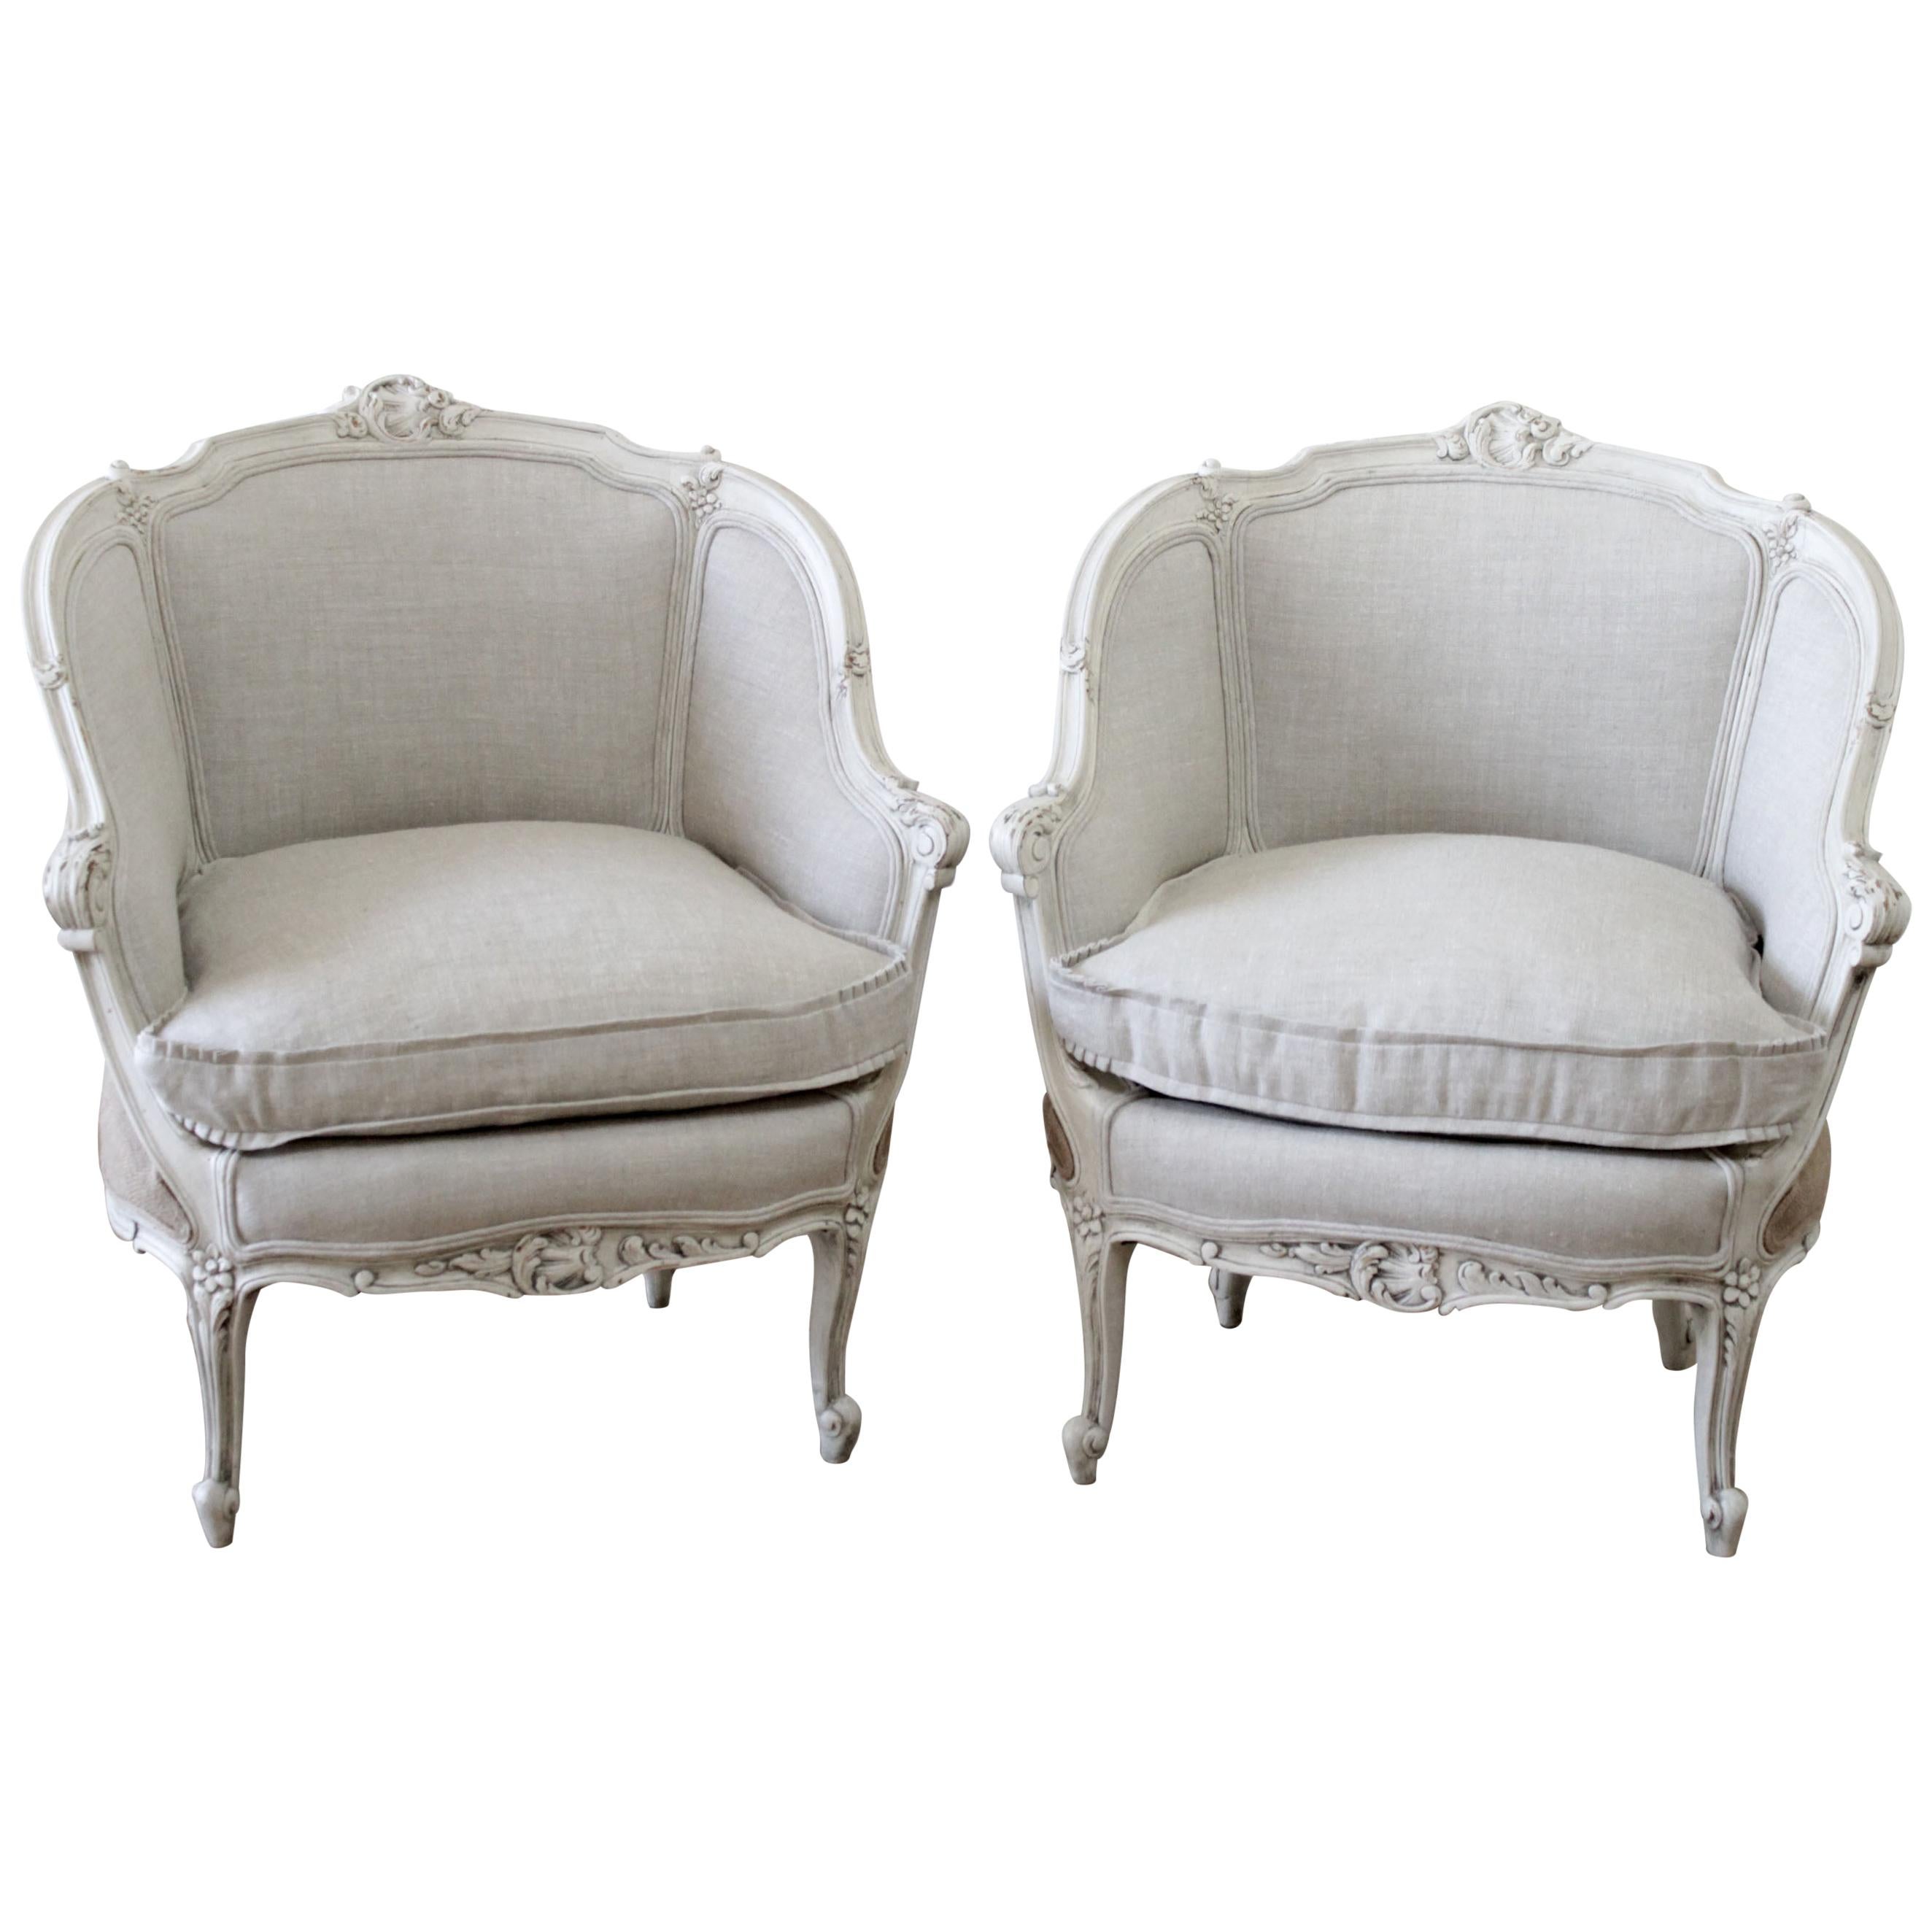 Pair of Vintage Painted and Upholstered French Style Marquis Chairs in Linen